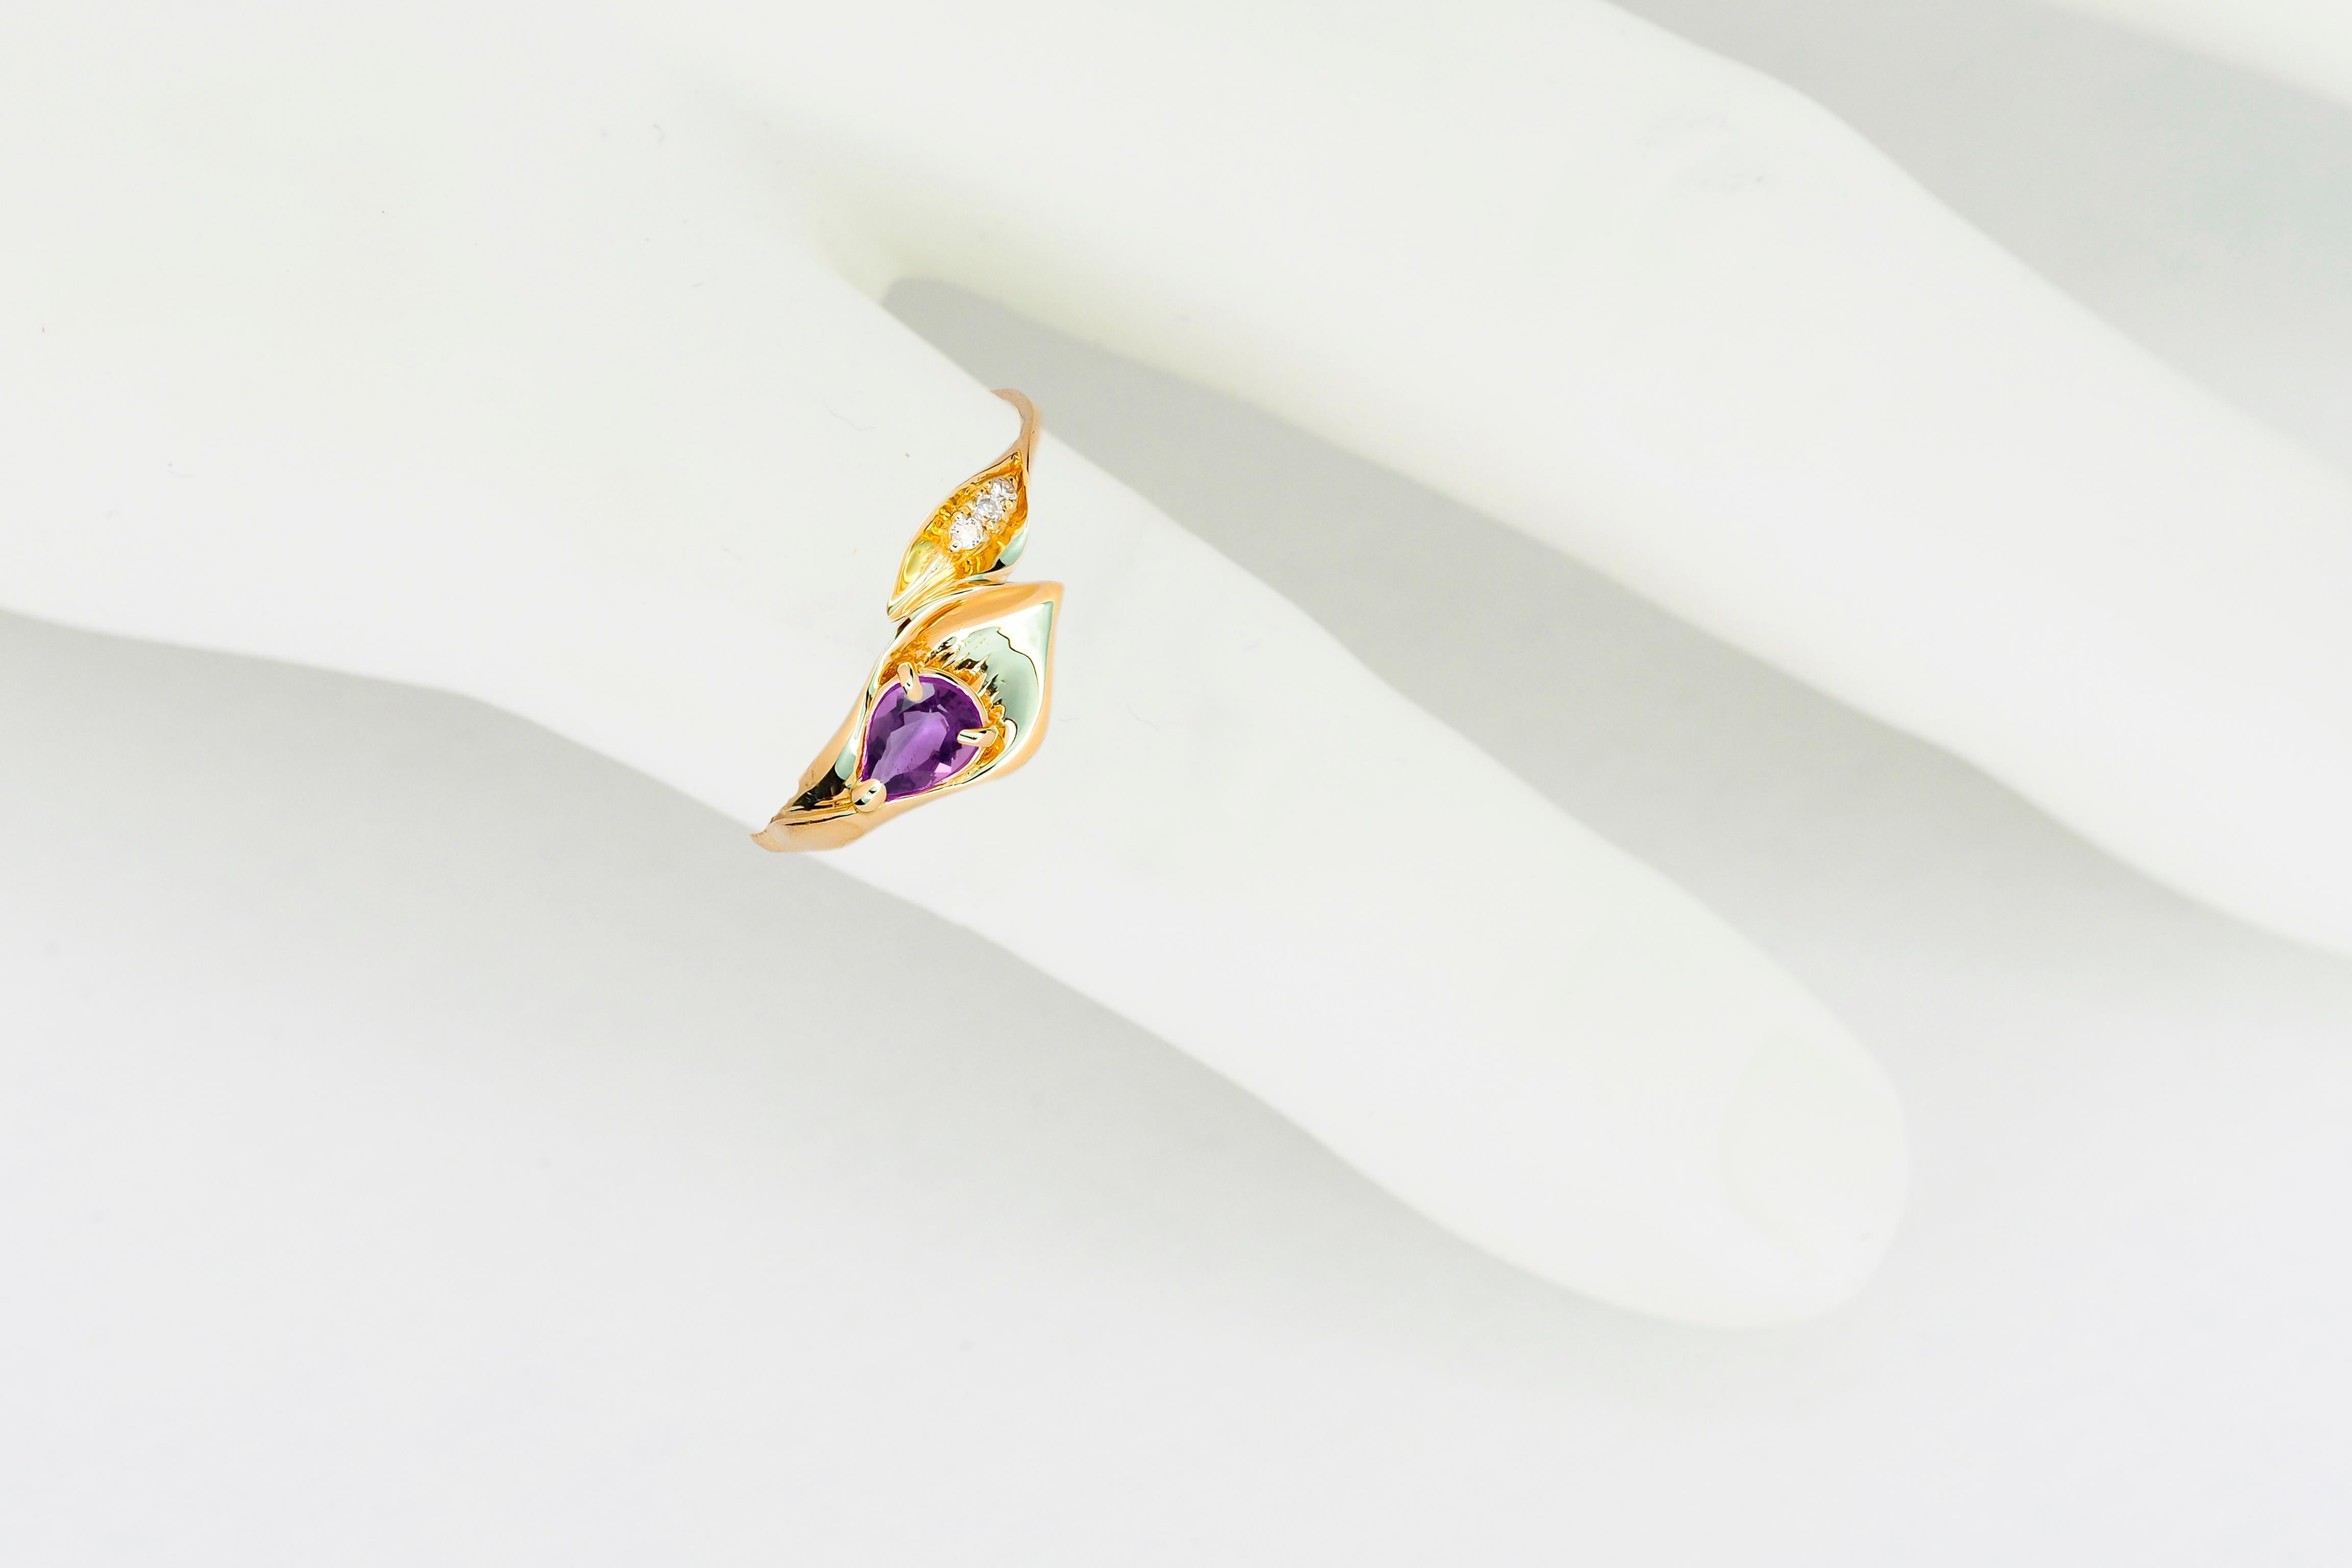 Women's Lily Calla Gold Ring, 14 Karat Gold Ring with Amethyst and Diamonds